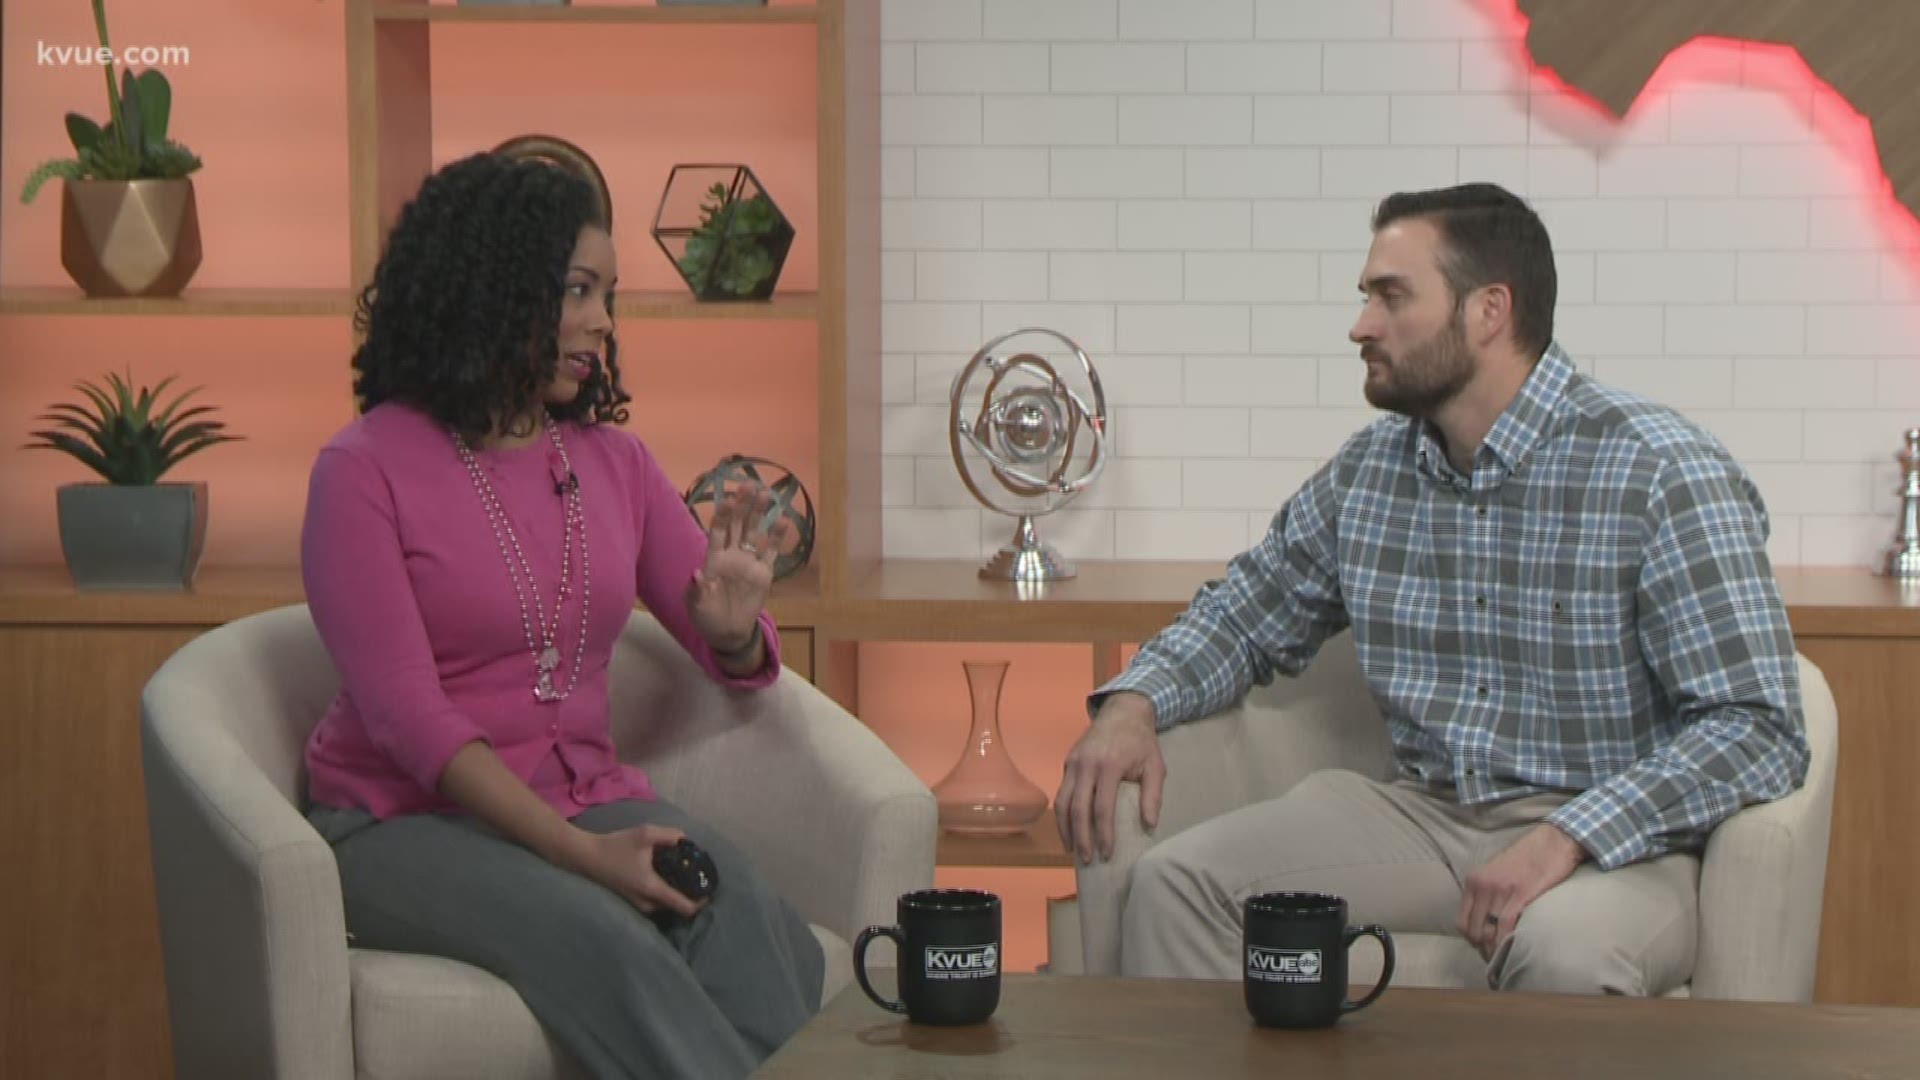 Lose weight, pay off your credit card and save money on rent? It's not a typical New Year's resolution, but renters who are looking to save on rent may want to consider adding a couple items to their to-do list this year. Local rental expert A-R Evans wit